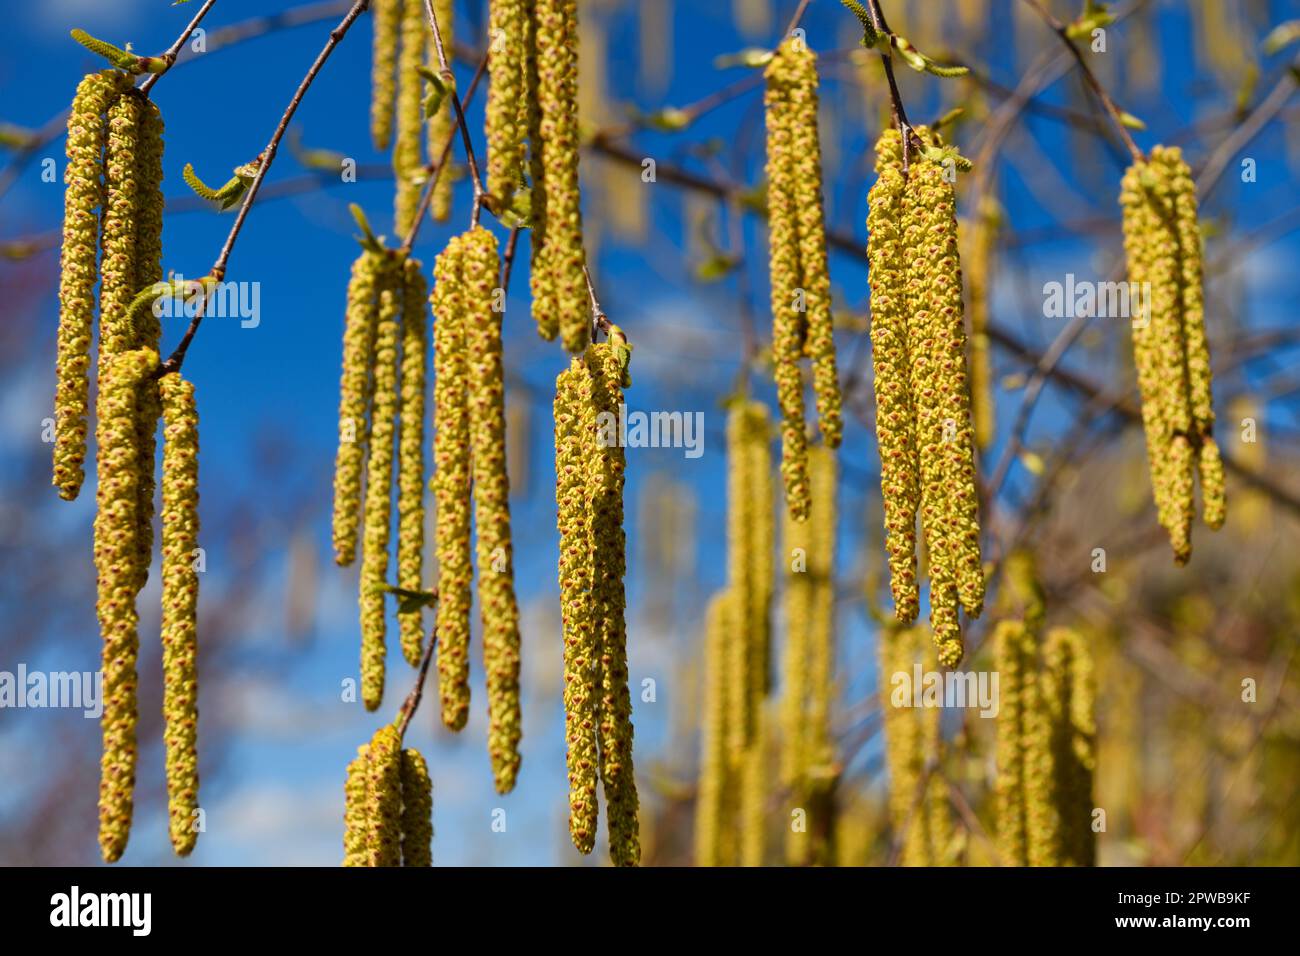 Close up of yellow male Catkins flowers hanging from a White Birch tree in Spring with immature upright green female catkins Stock Photo